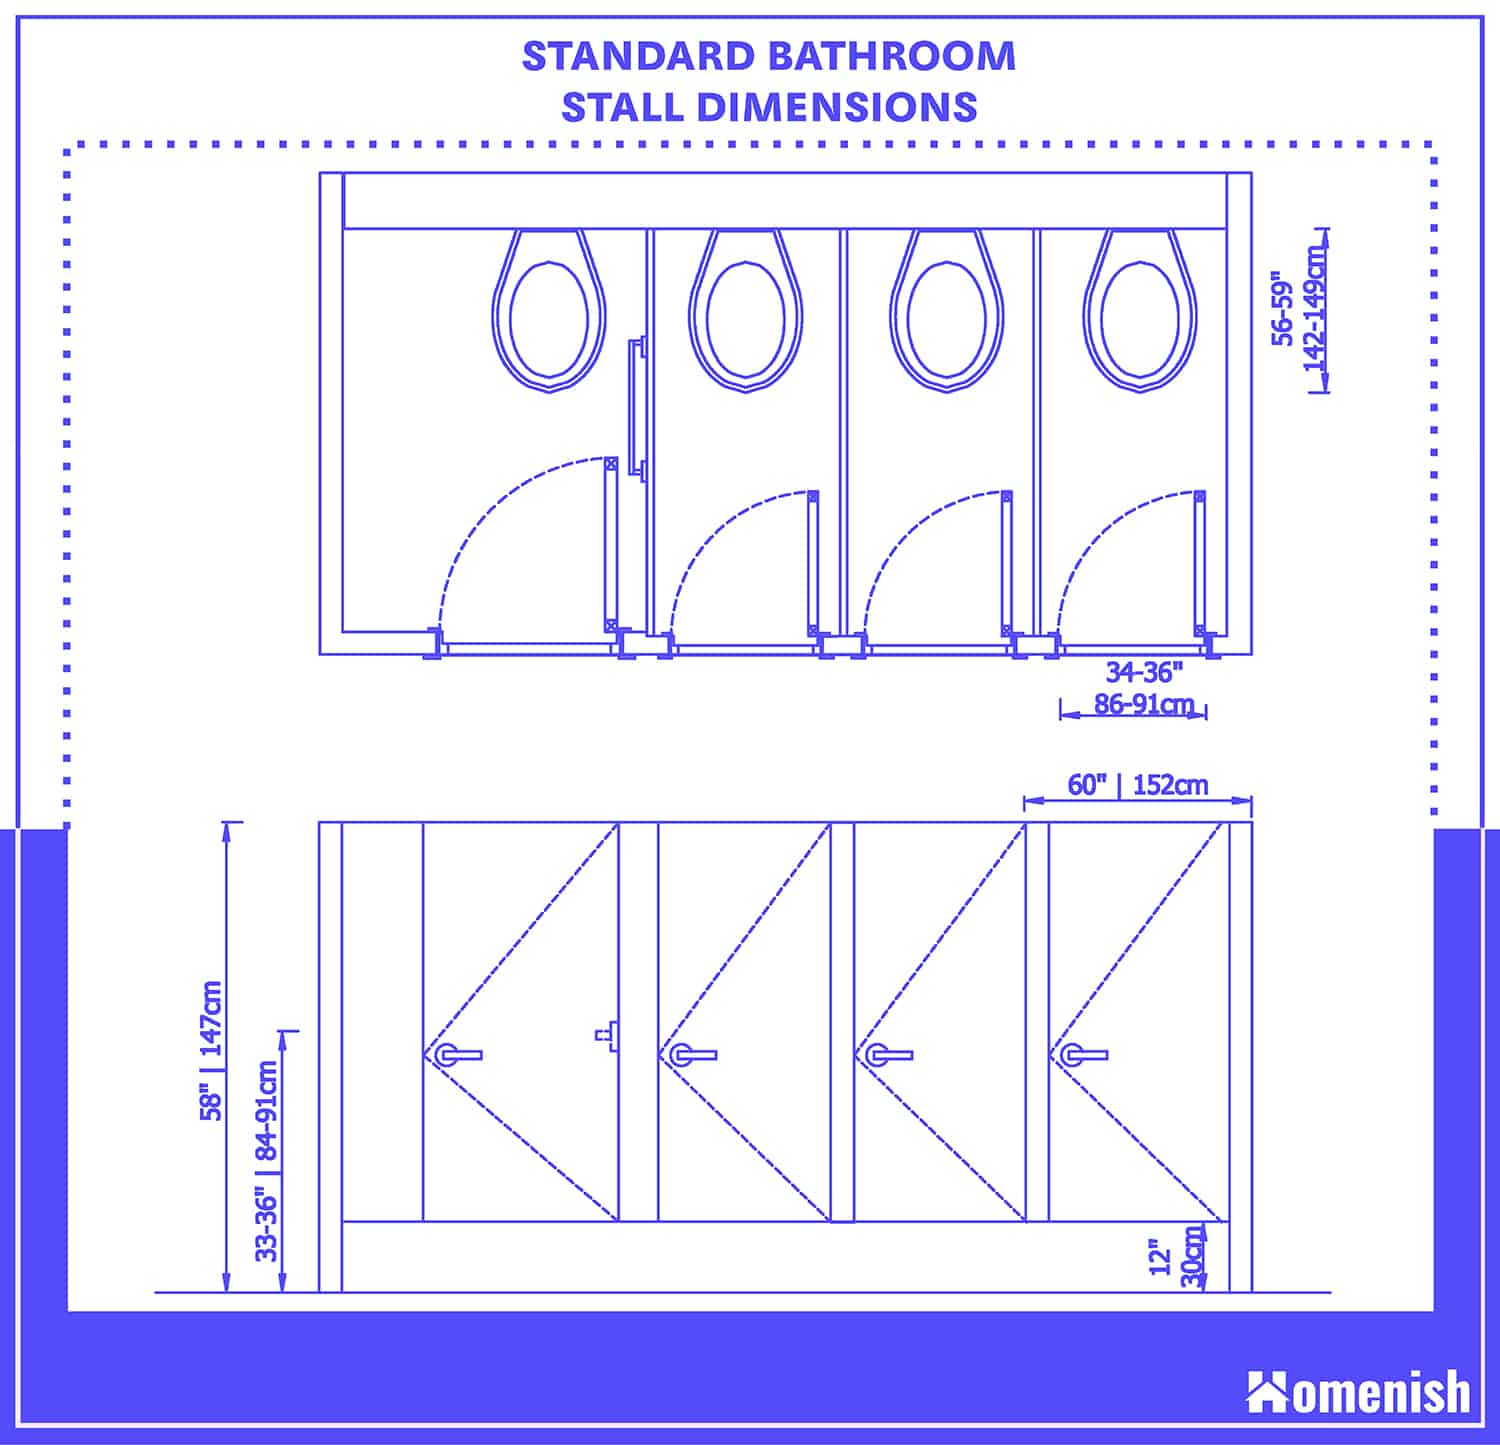 What Are The Bathroom Stall Dimensions Homenish